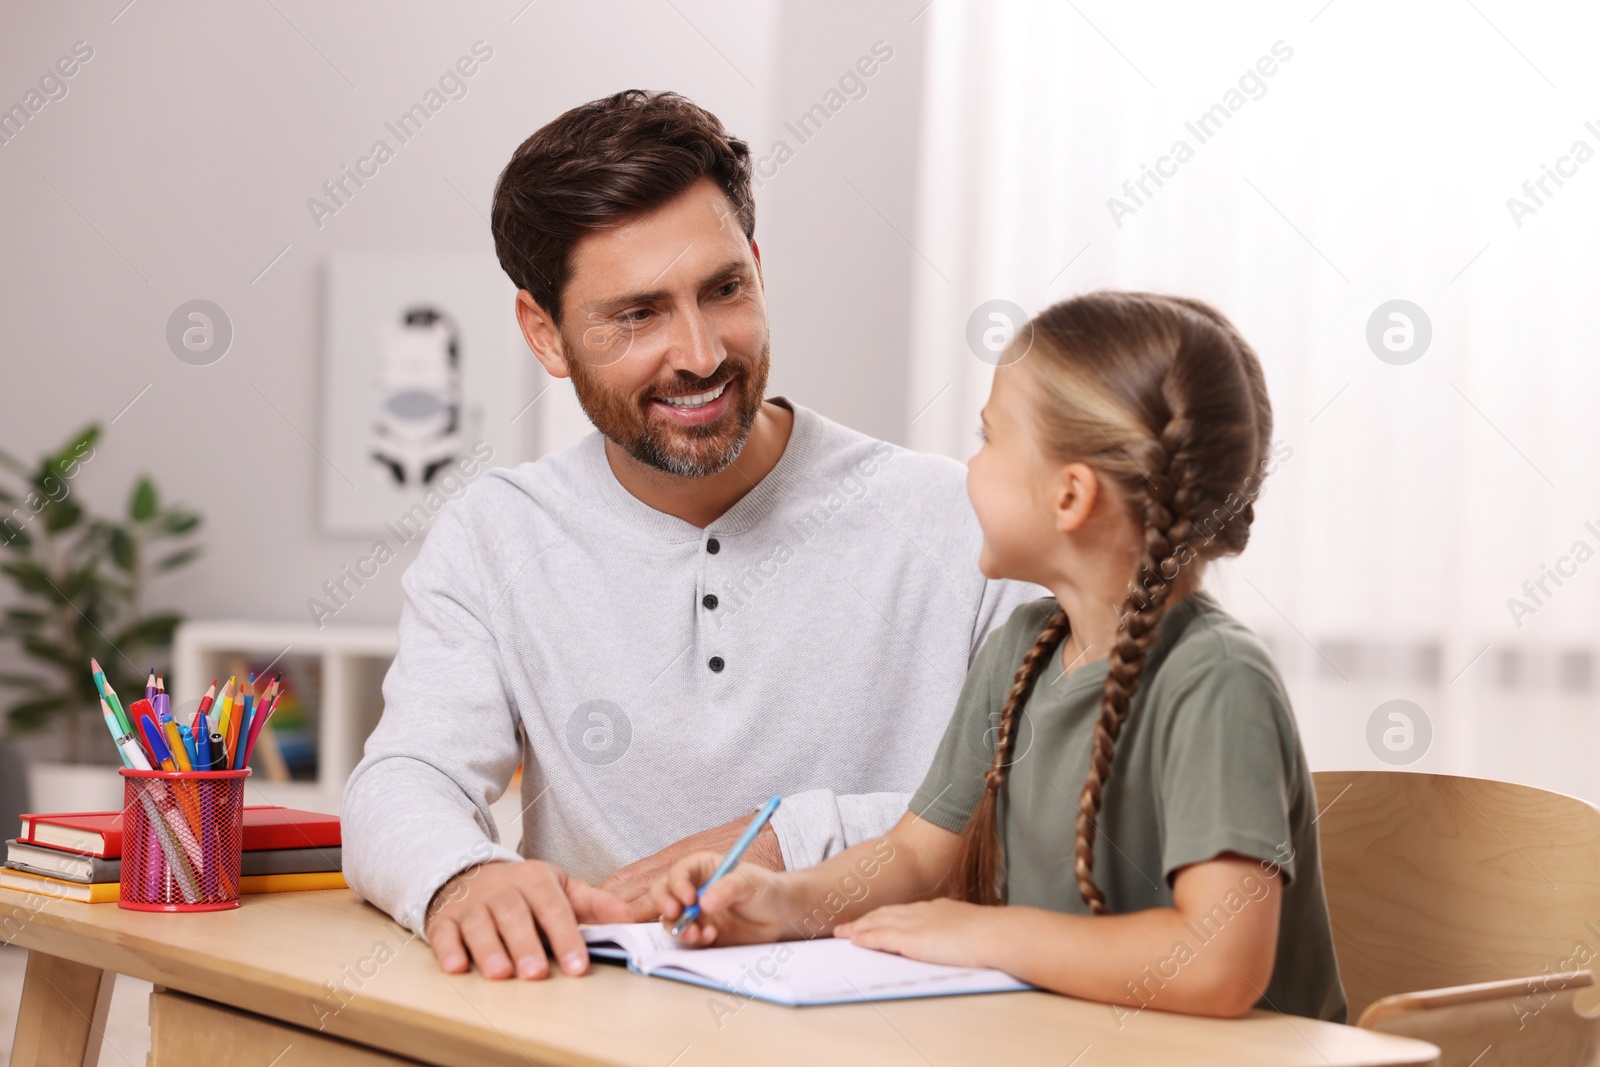 Photo of Dyslexia problem. Father helping daughter with homework at table in room